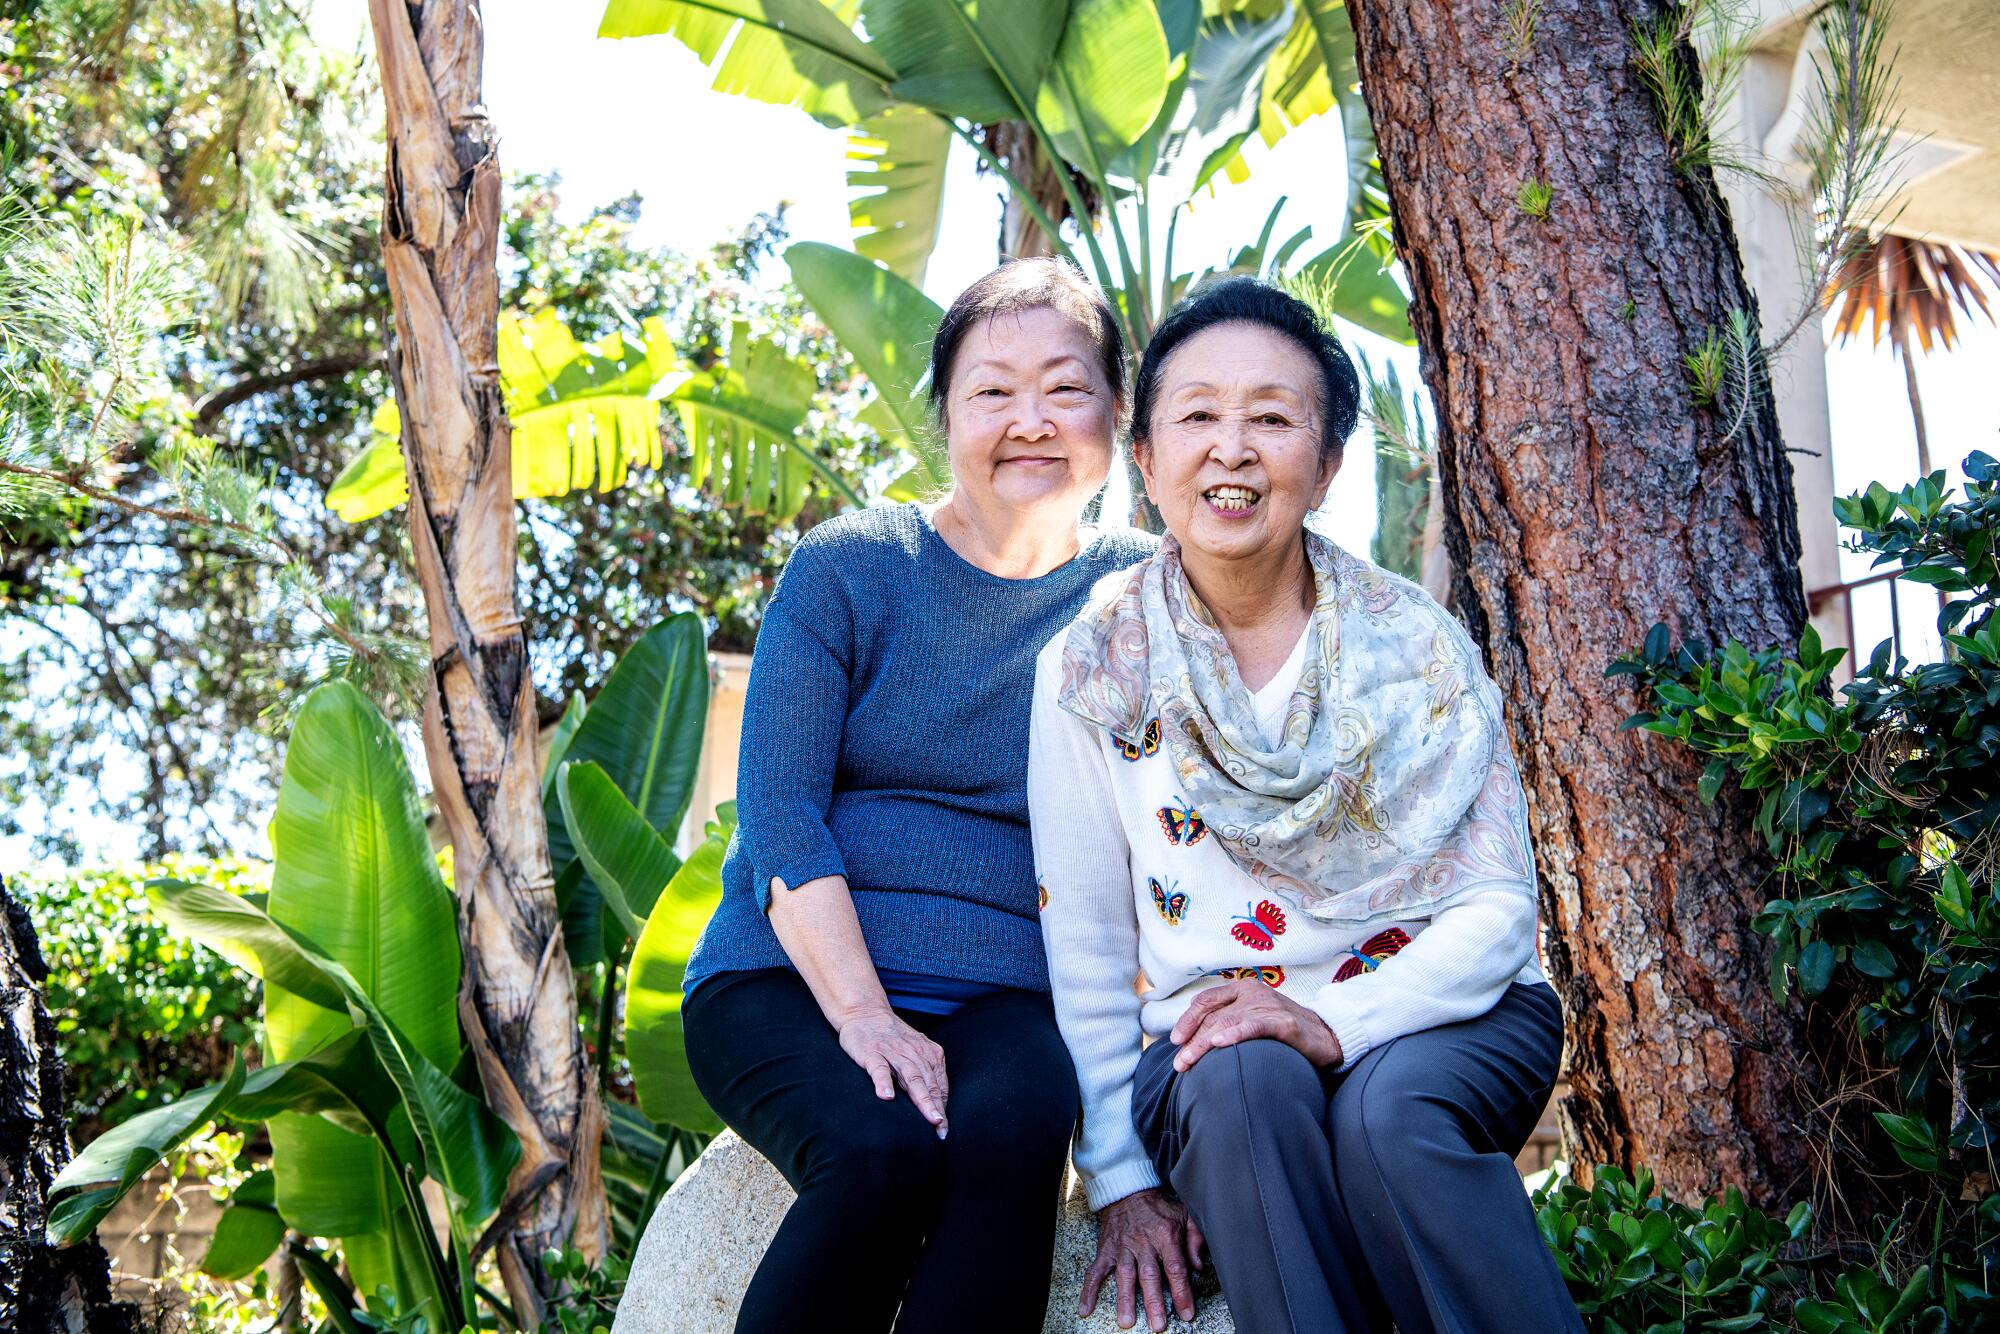 Becky Applegate and Takako Osumi sit next to trees.